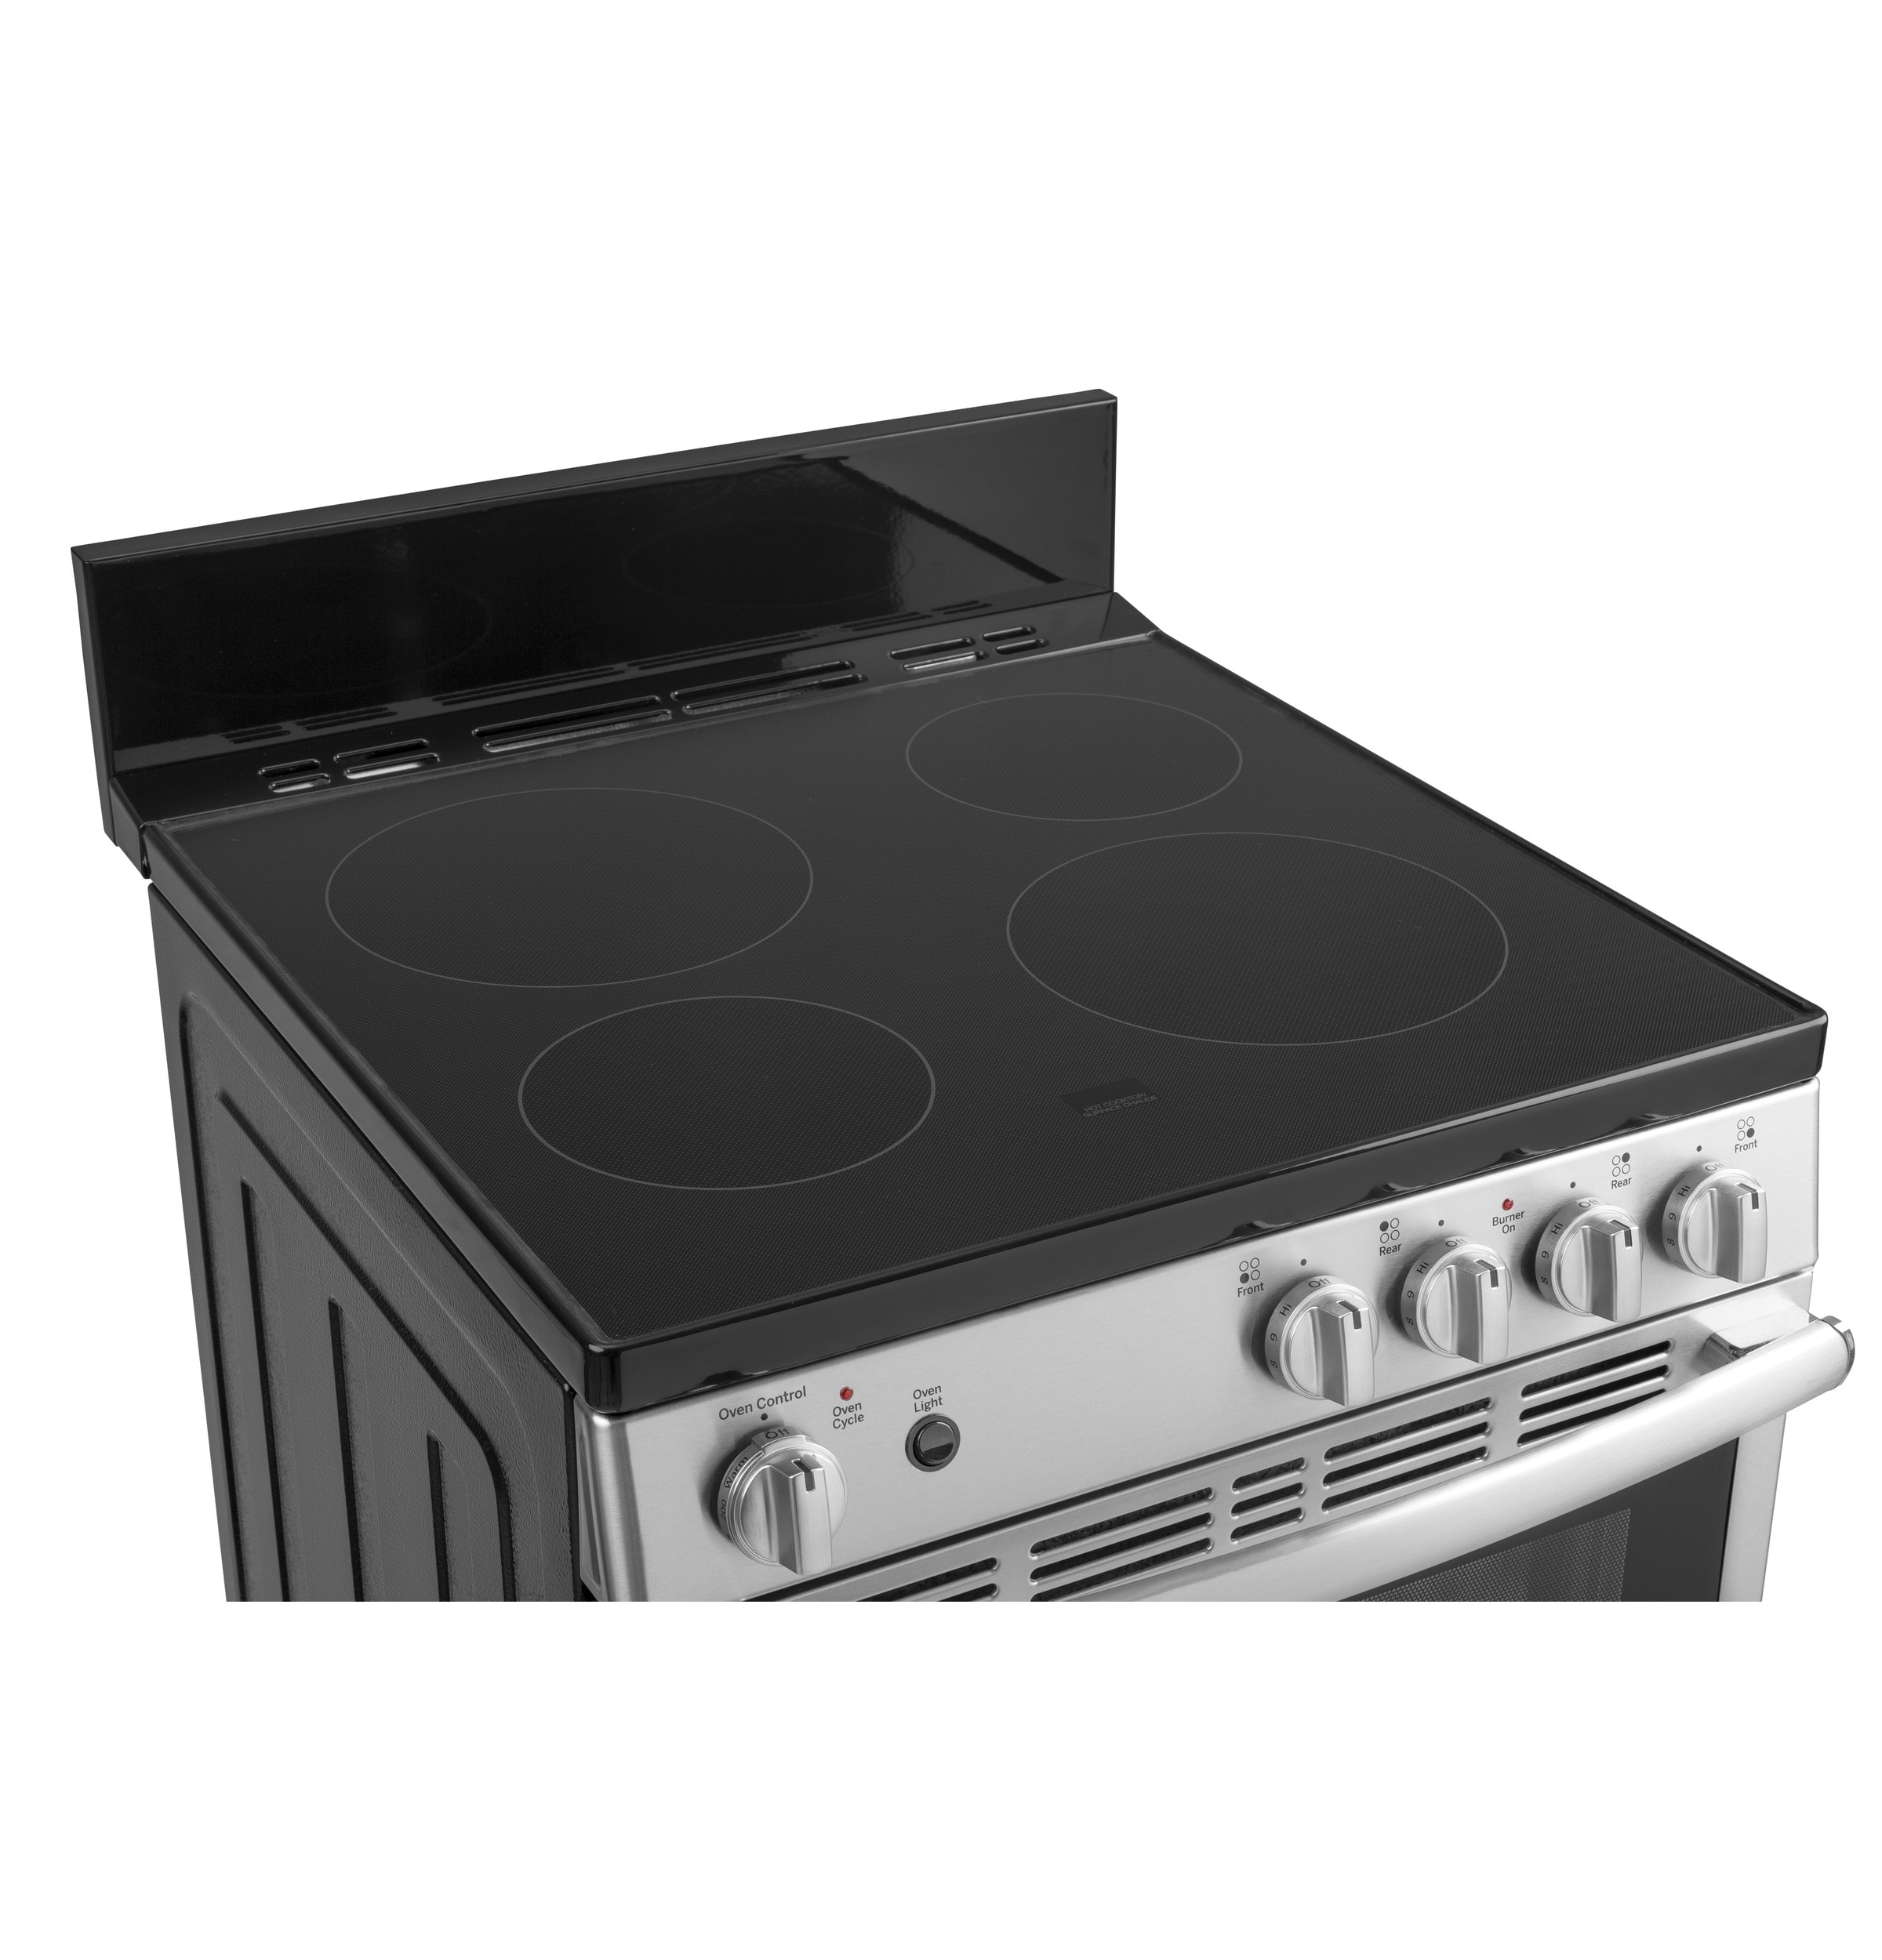 GE 24 Inch Compact Electric Range 4-Burner, Stove,Stainless Steel